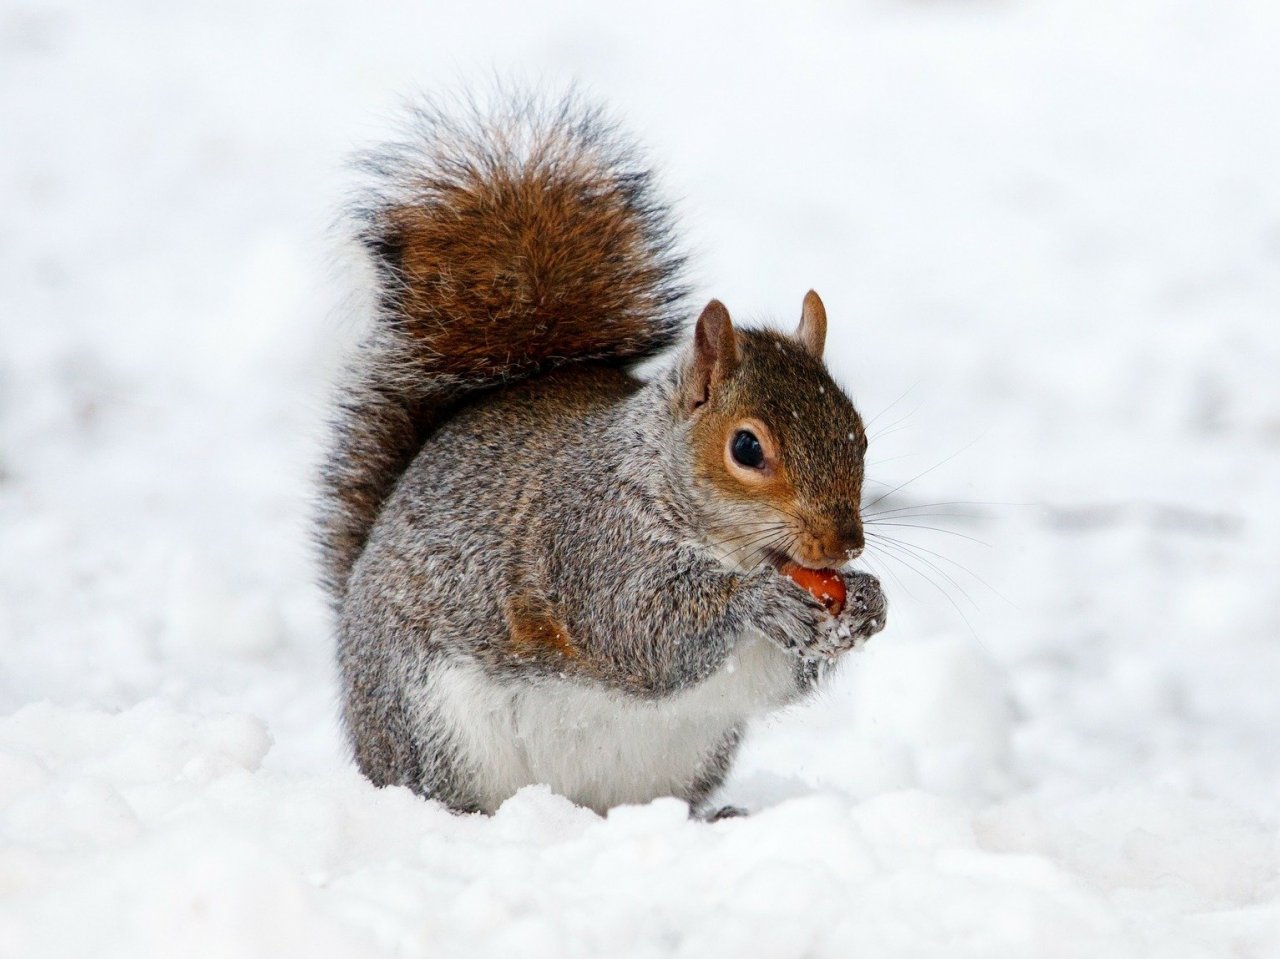 Squirrel on the snow jigsaw puzzle